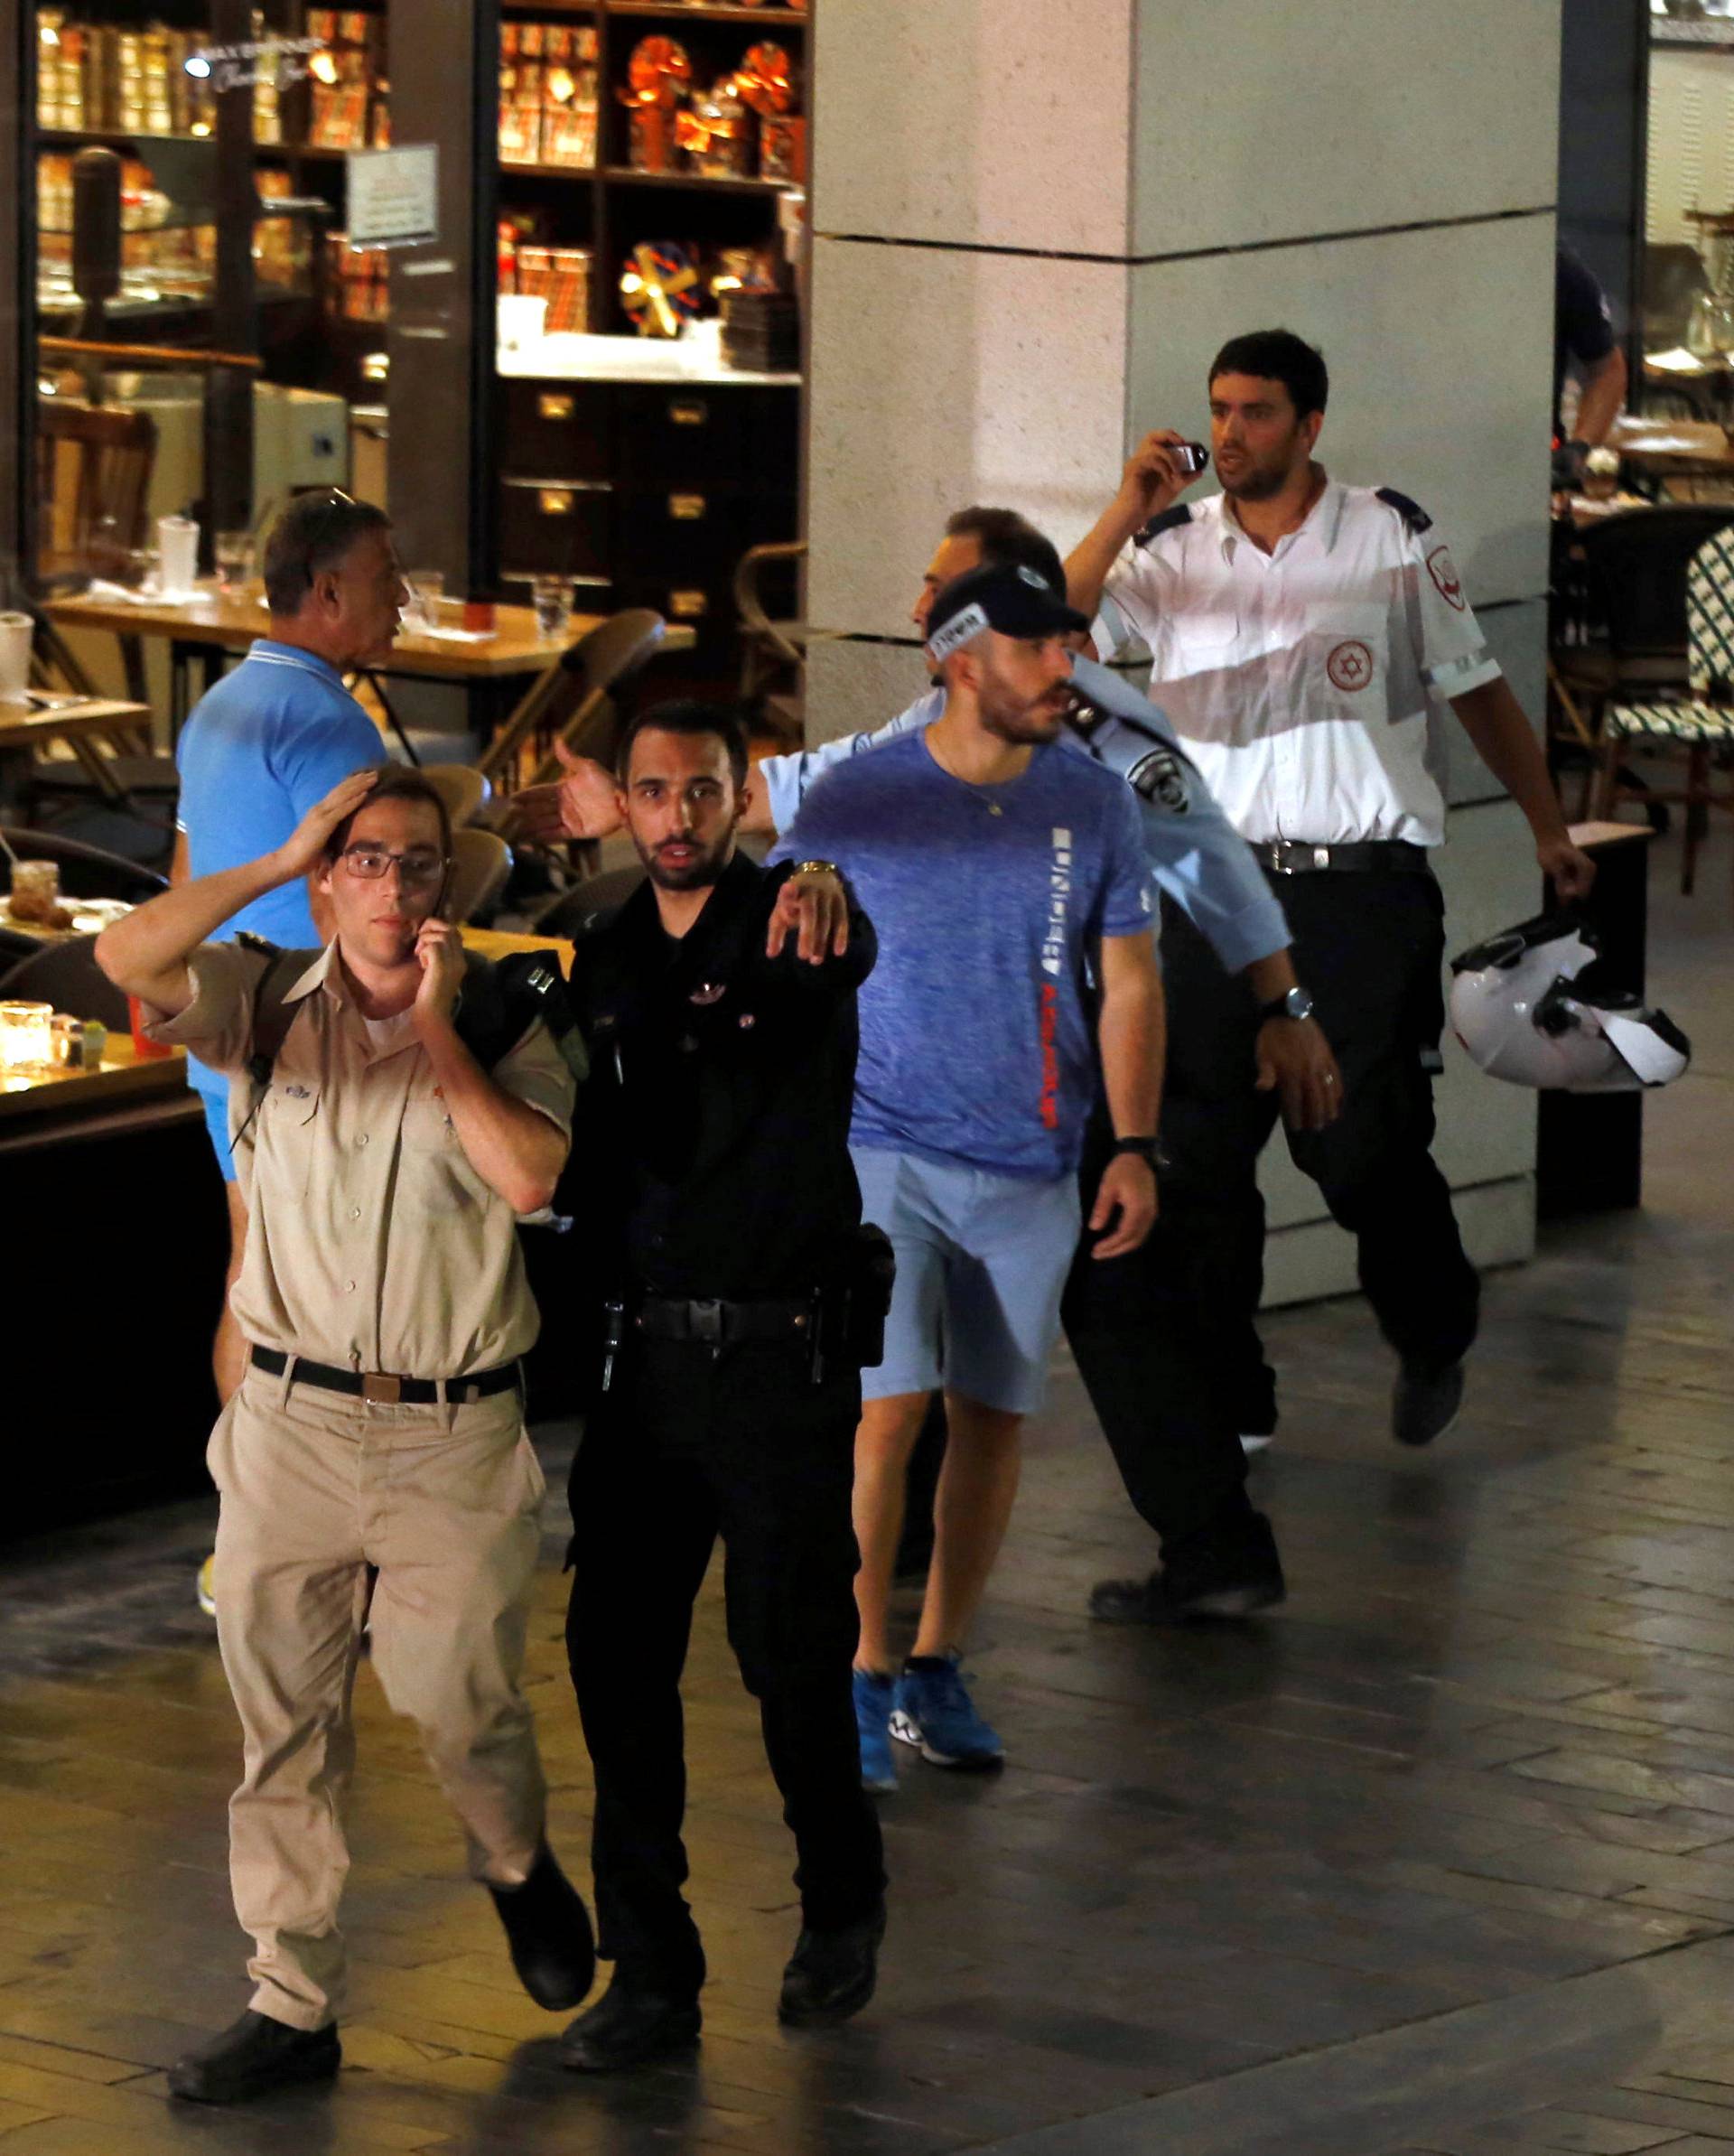 An Israeli policeman clears the area after a shooting attack took place in the center of Tel Aviv